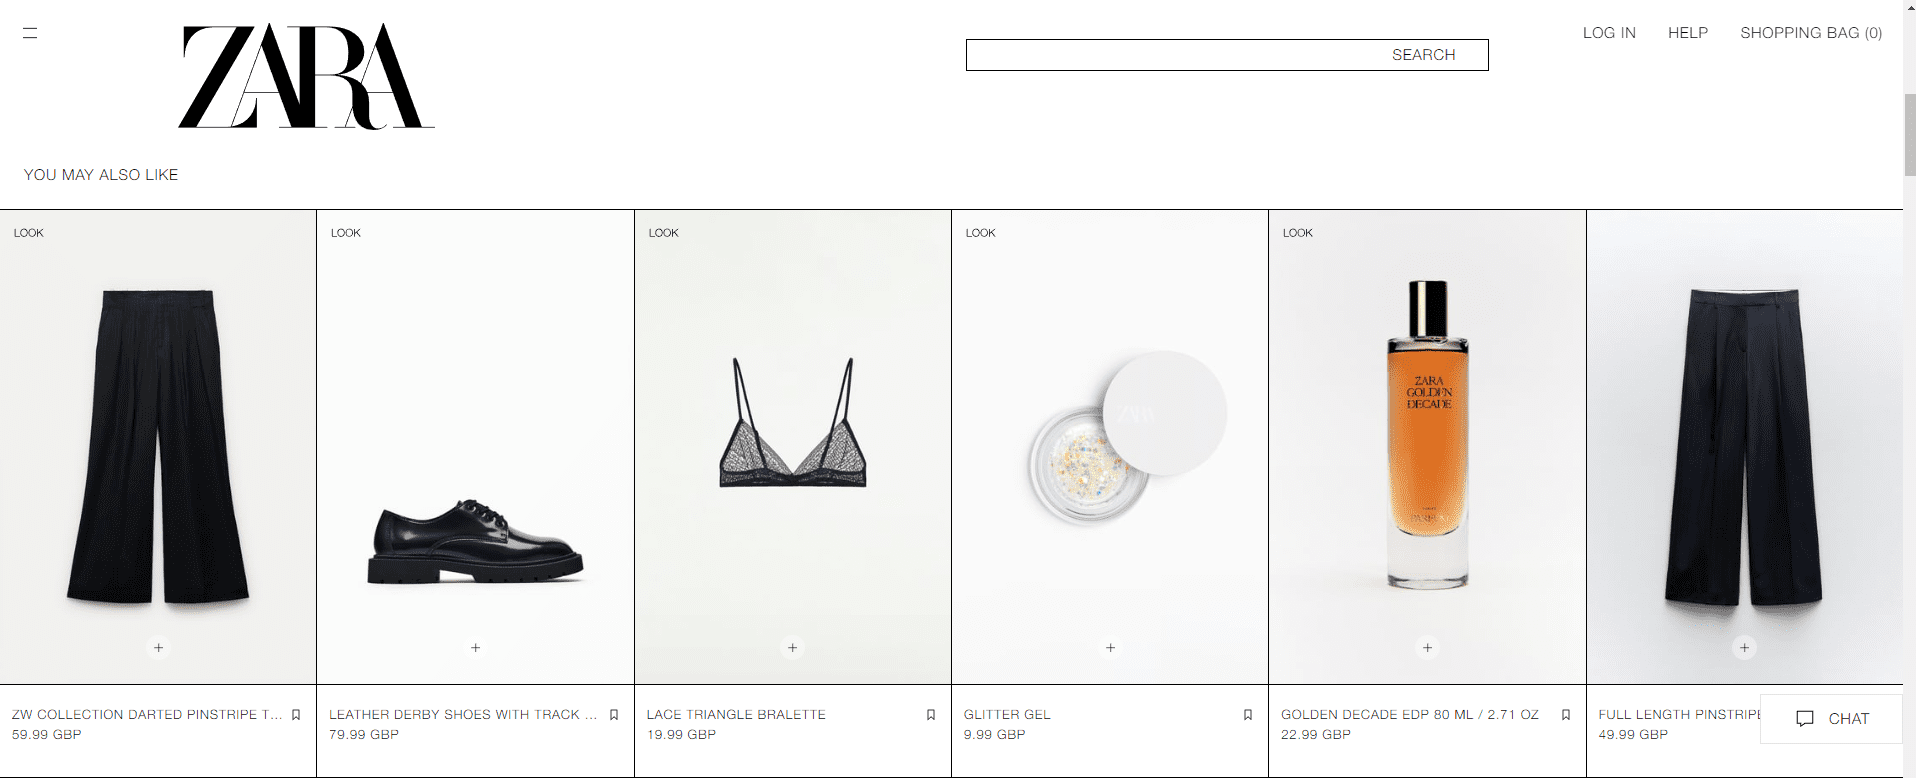 Zara product recommendation feature